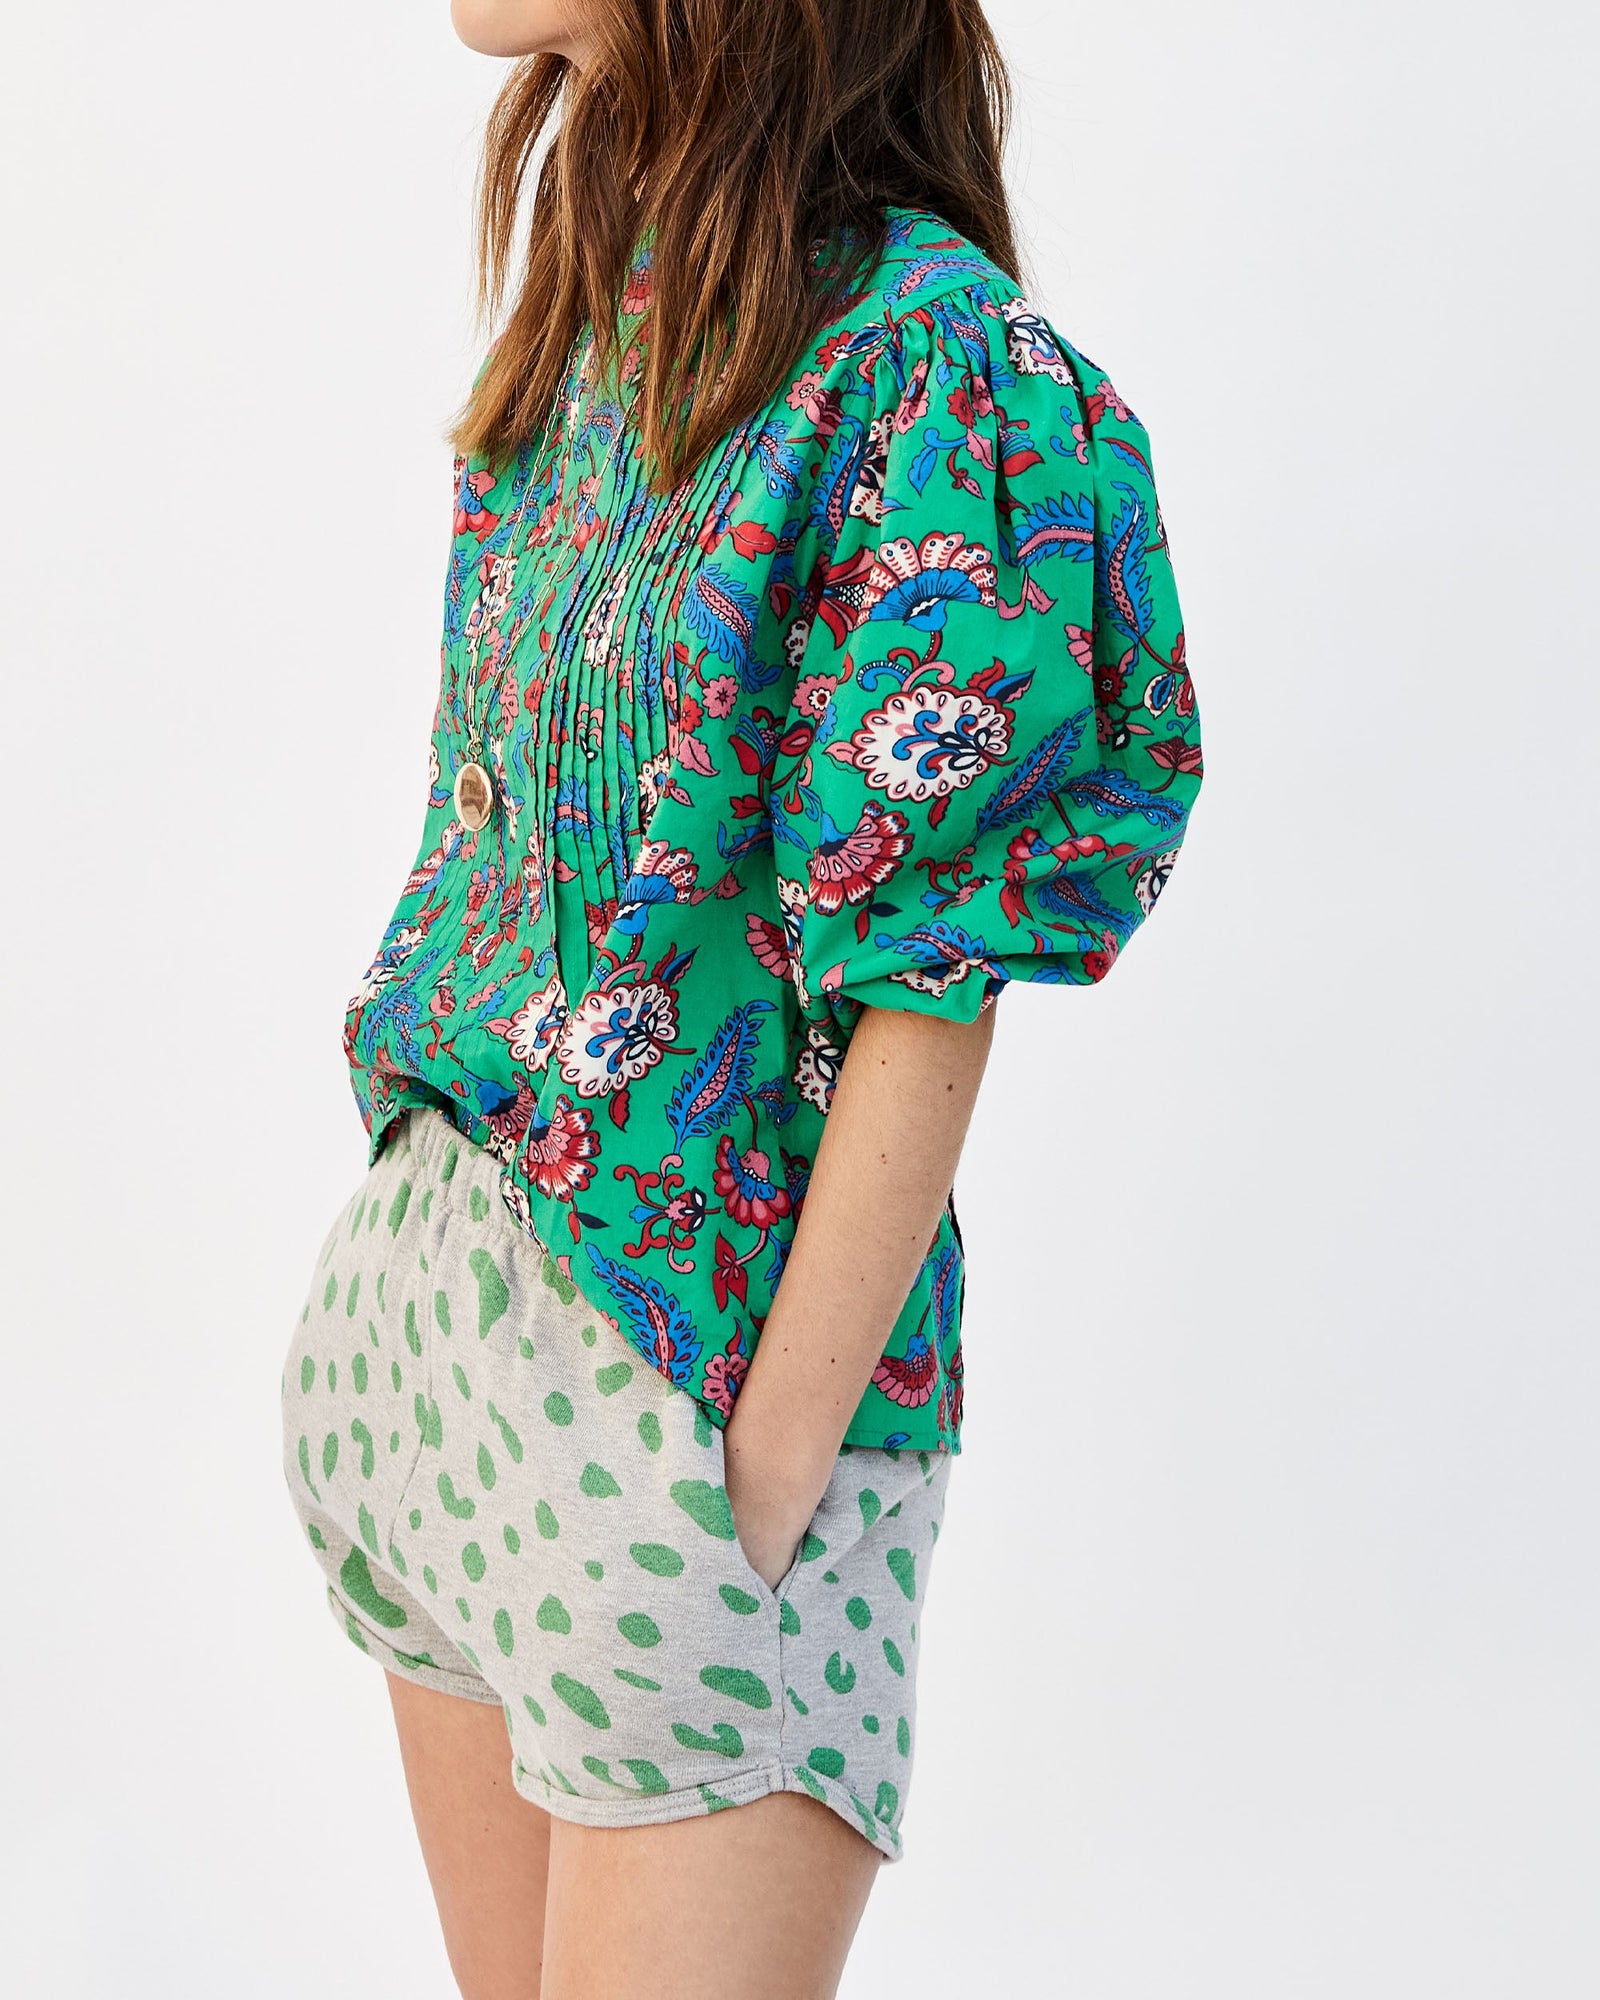 Frannie wearing our Green Francoise Blouse and Jaguar Printed Sweatshorts